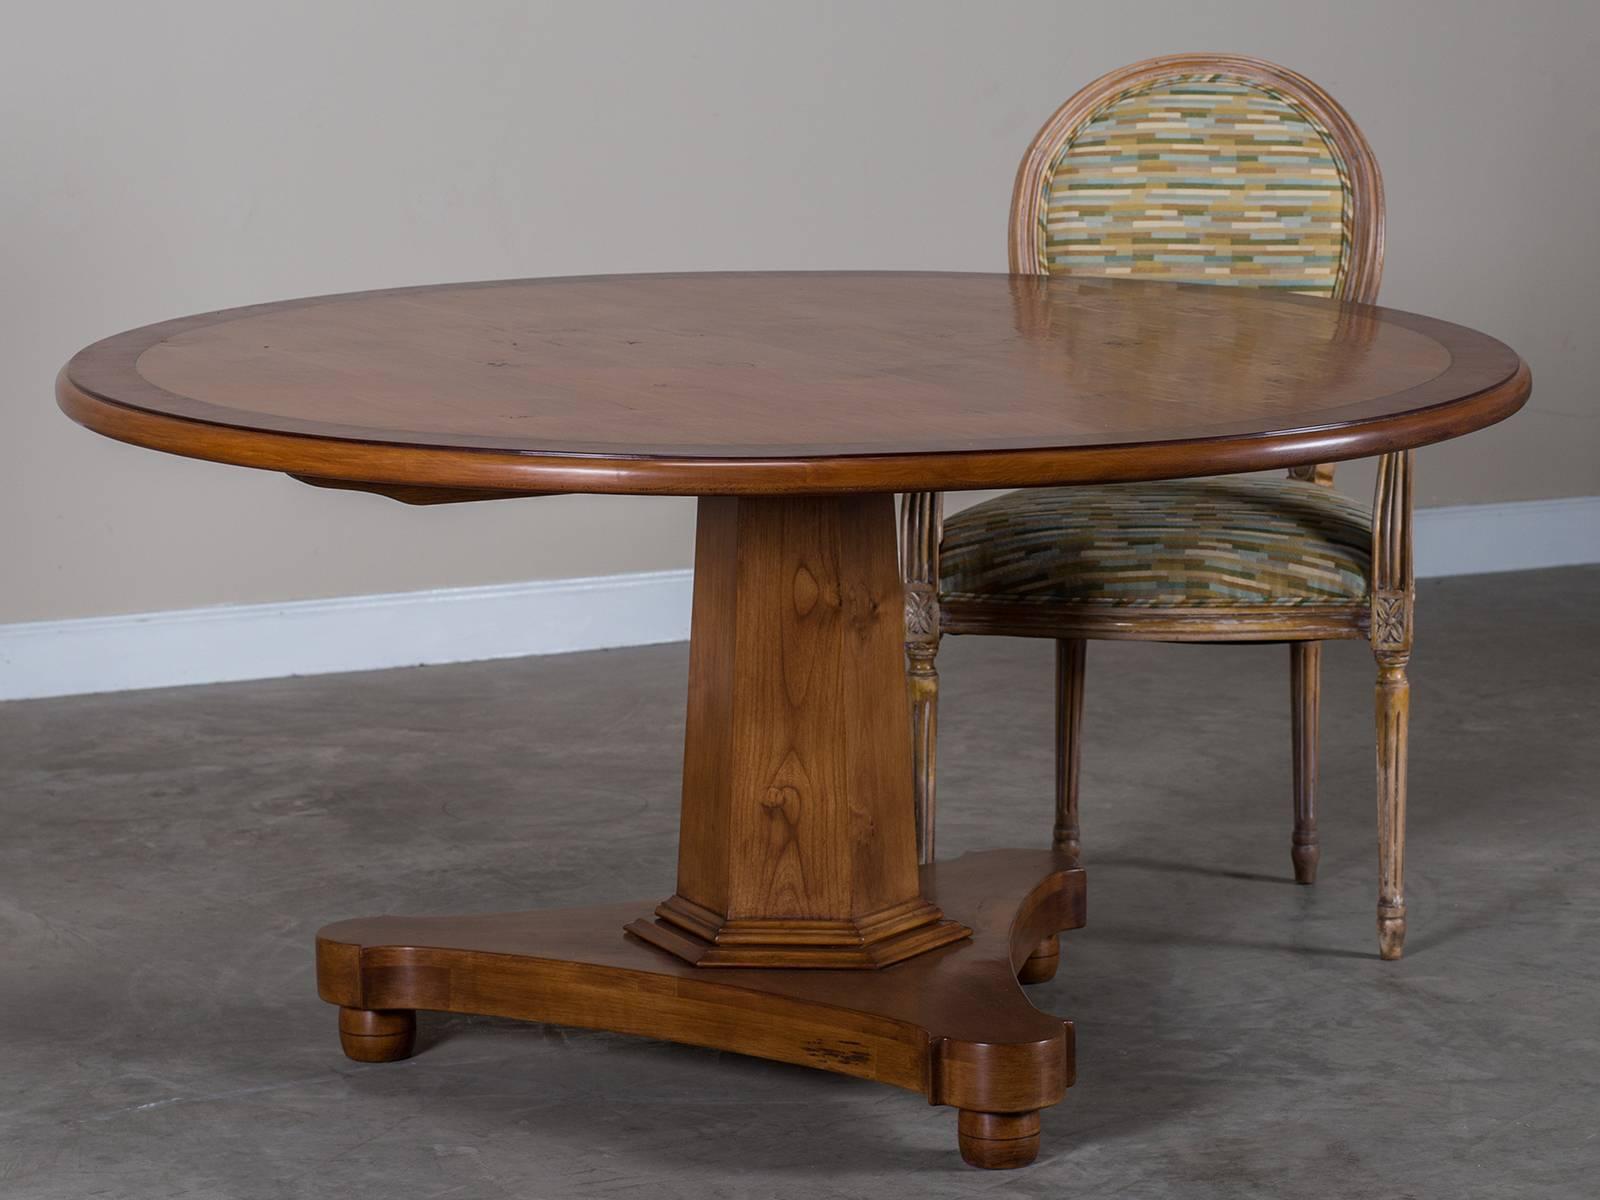 Contemporary English Regency Style Cherrywood Round Pedestal Dining Table